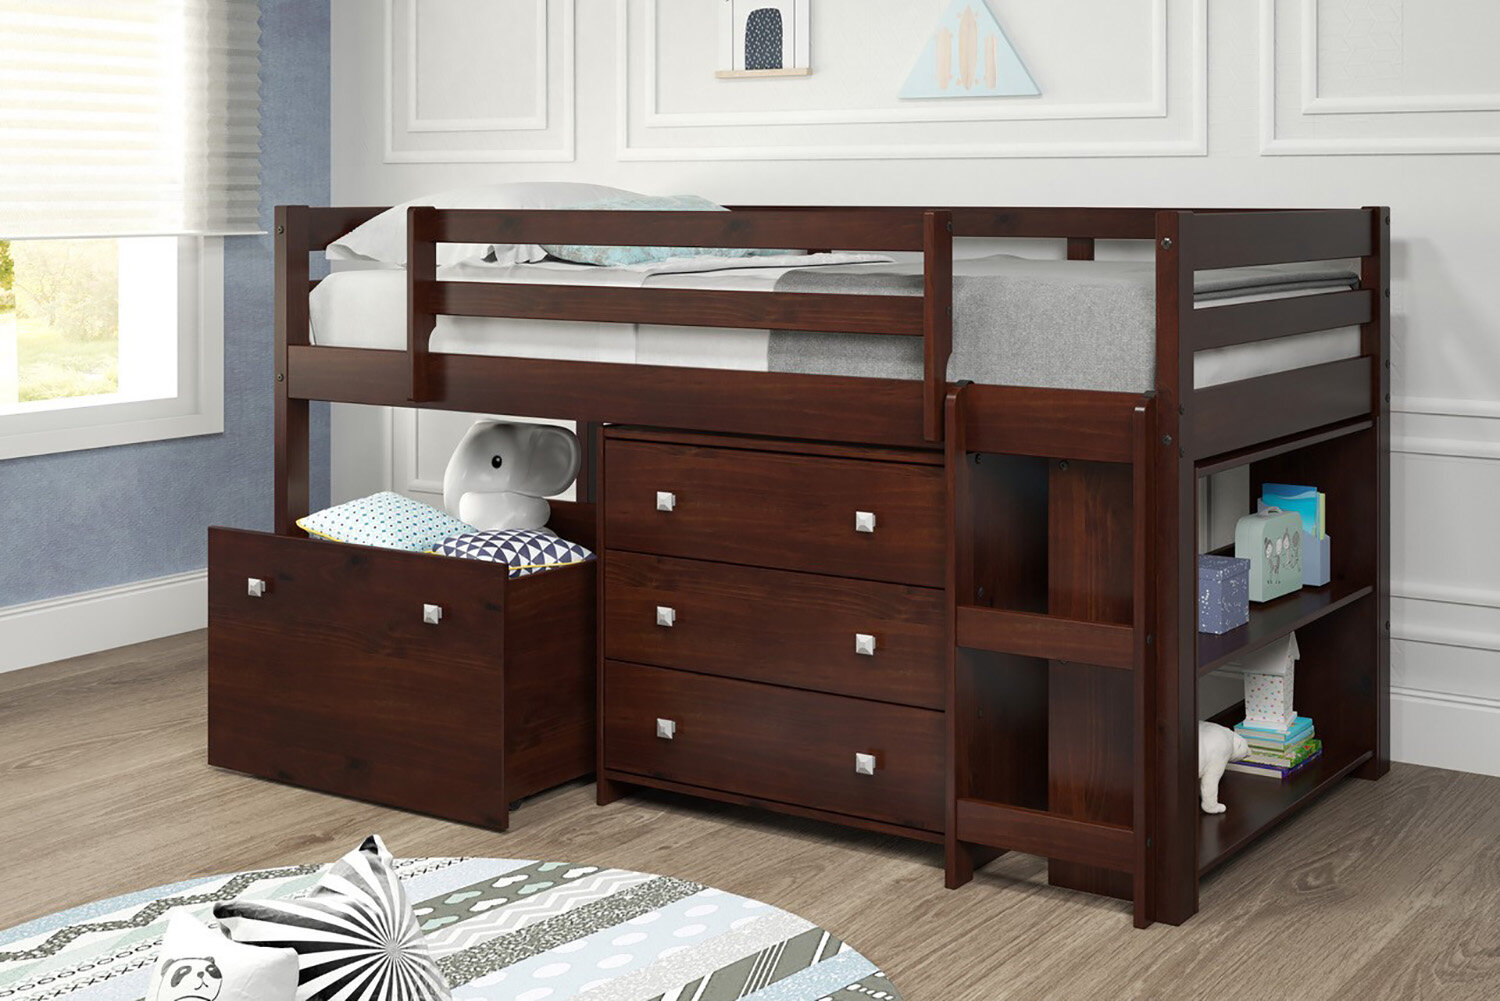 twin bed with dresser underneath